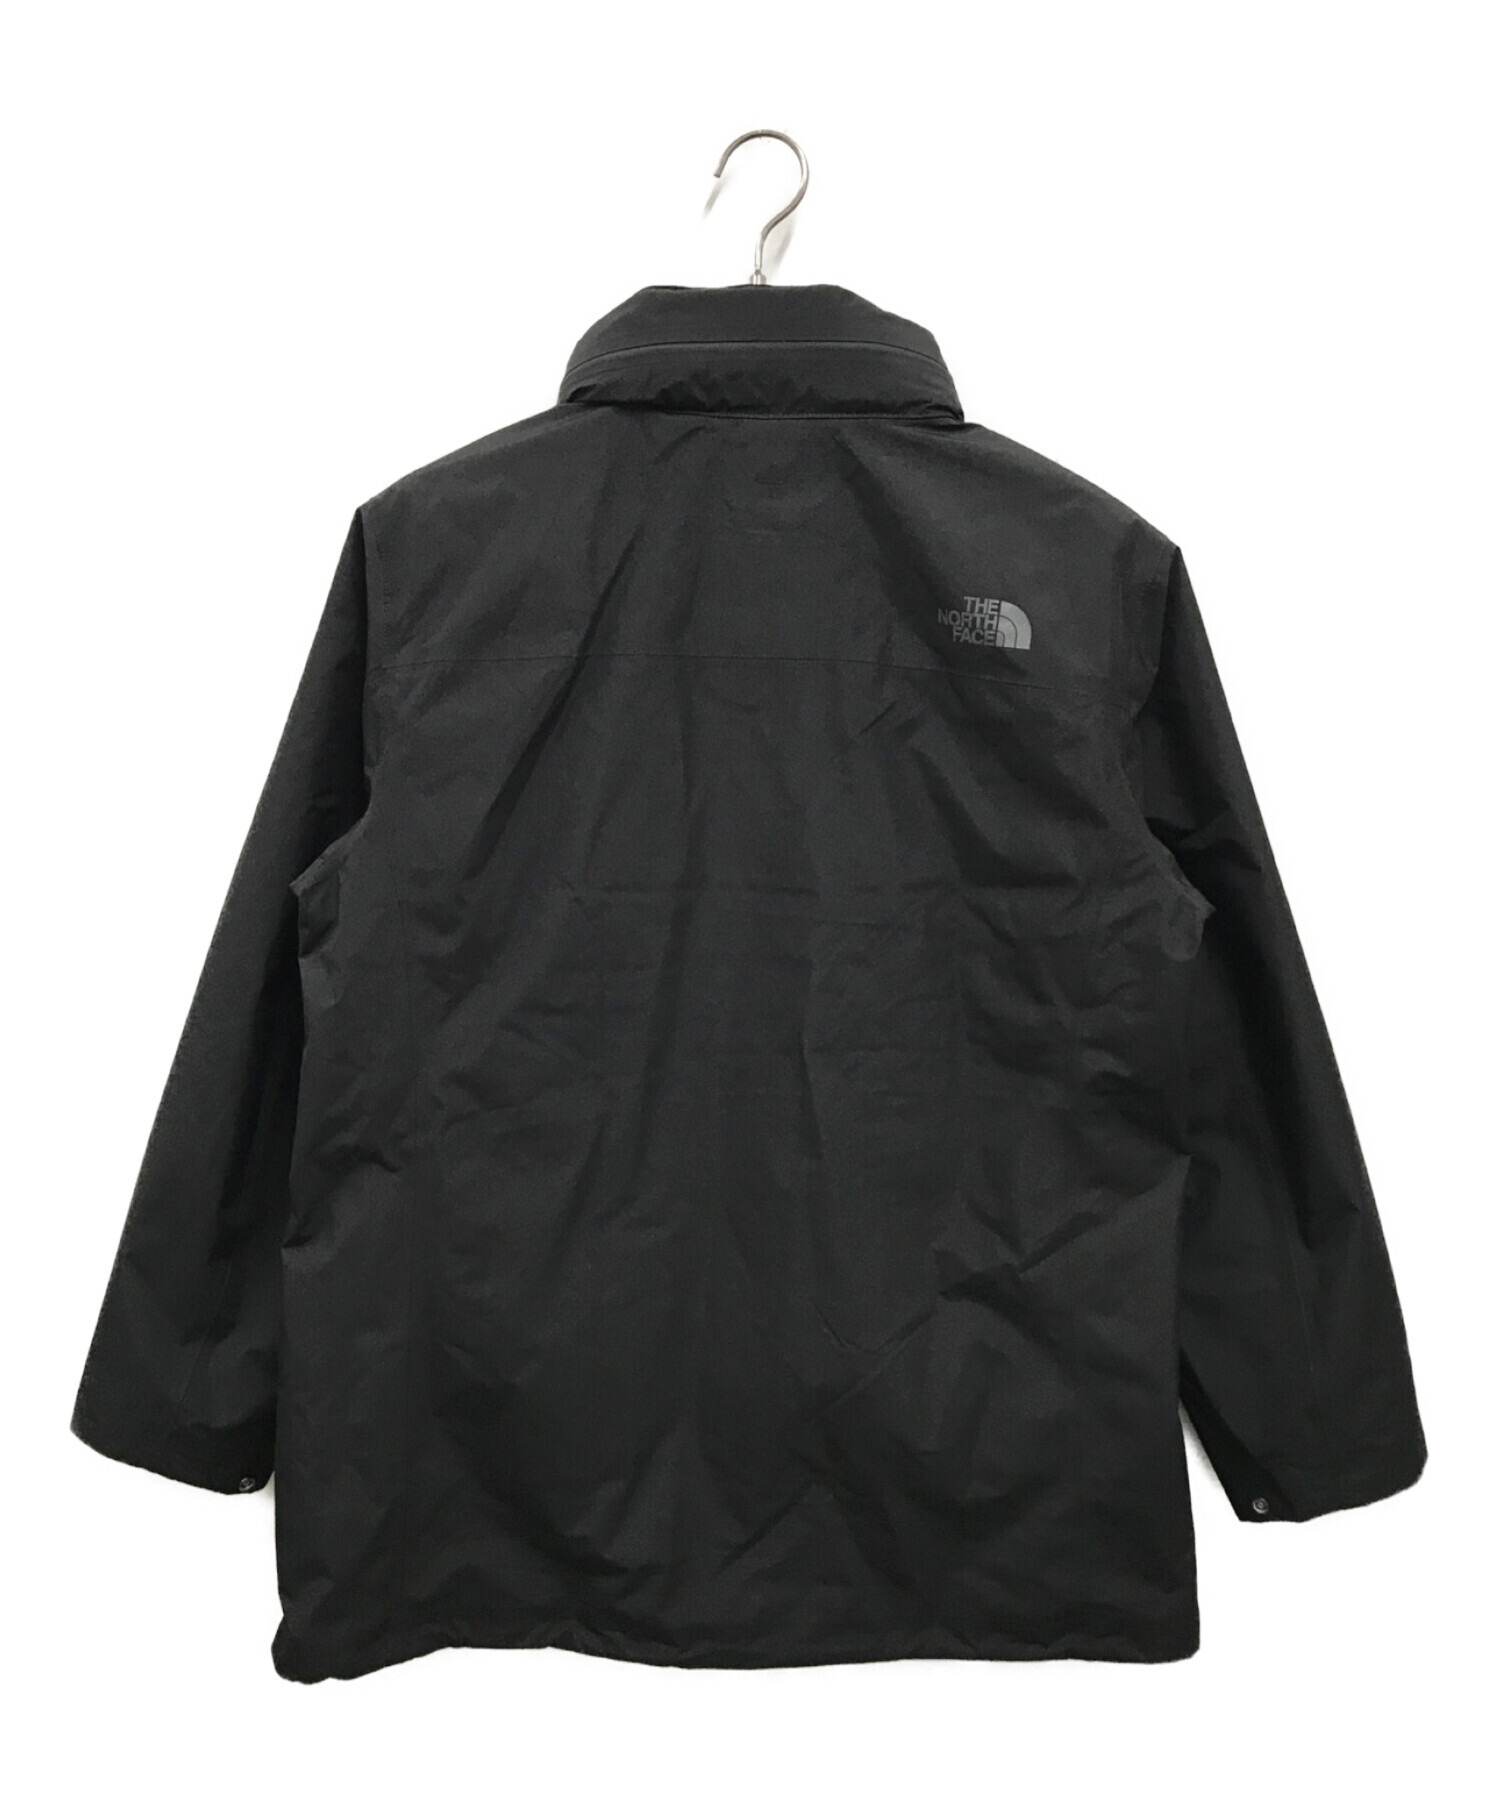 GTX Puff Magne Triclimate Jacket NP62162 - ダウンジャケット